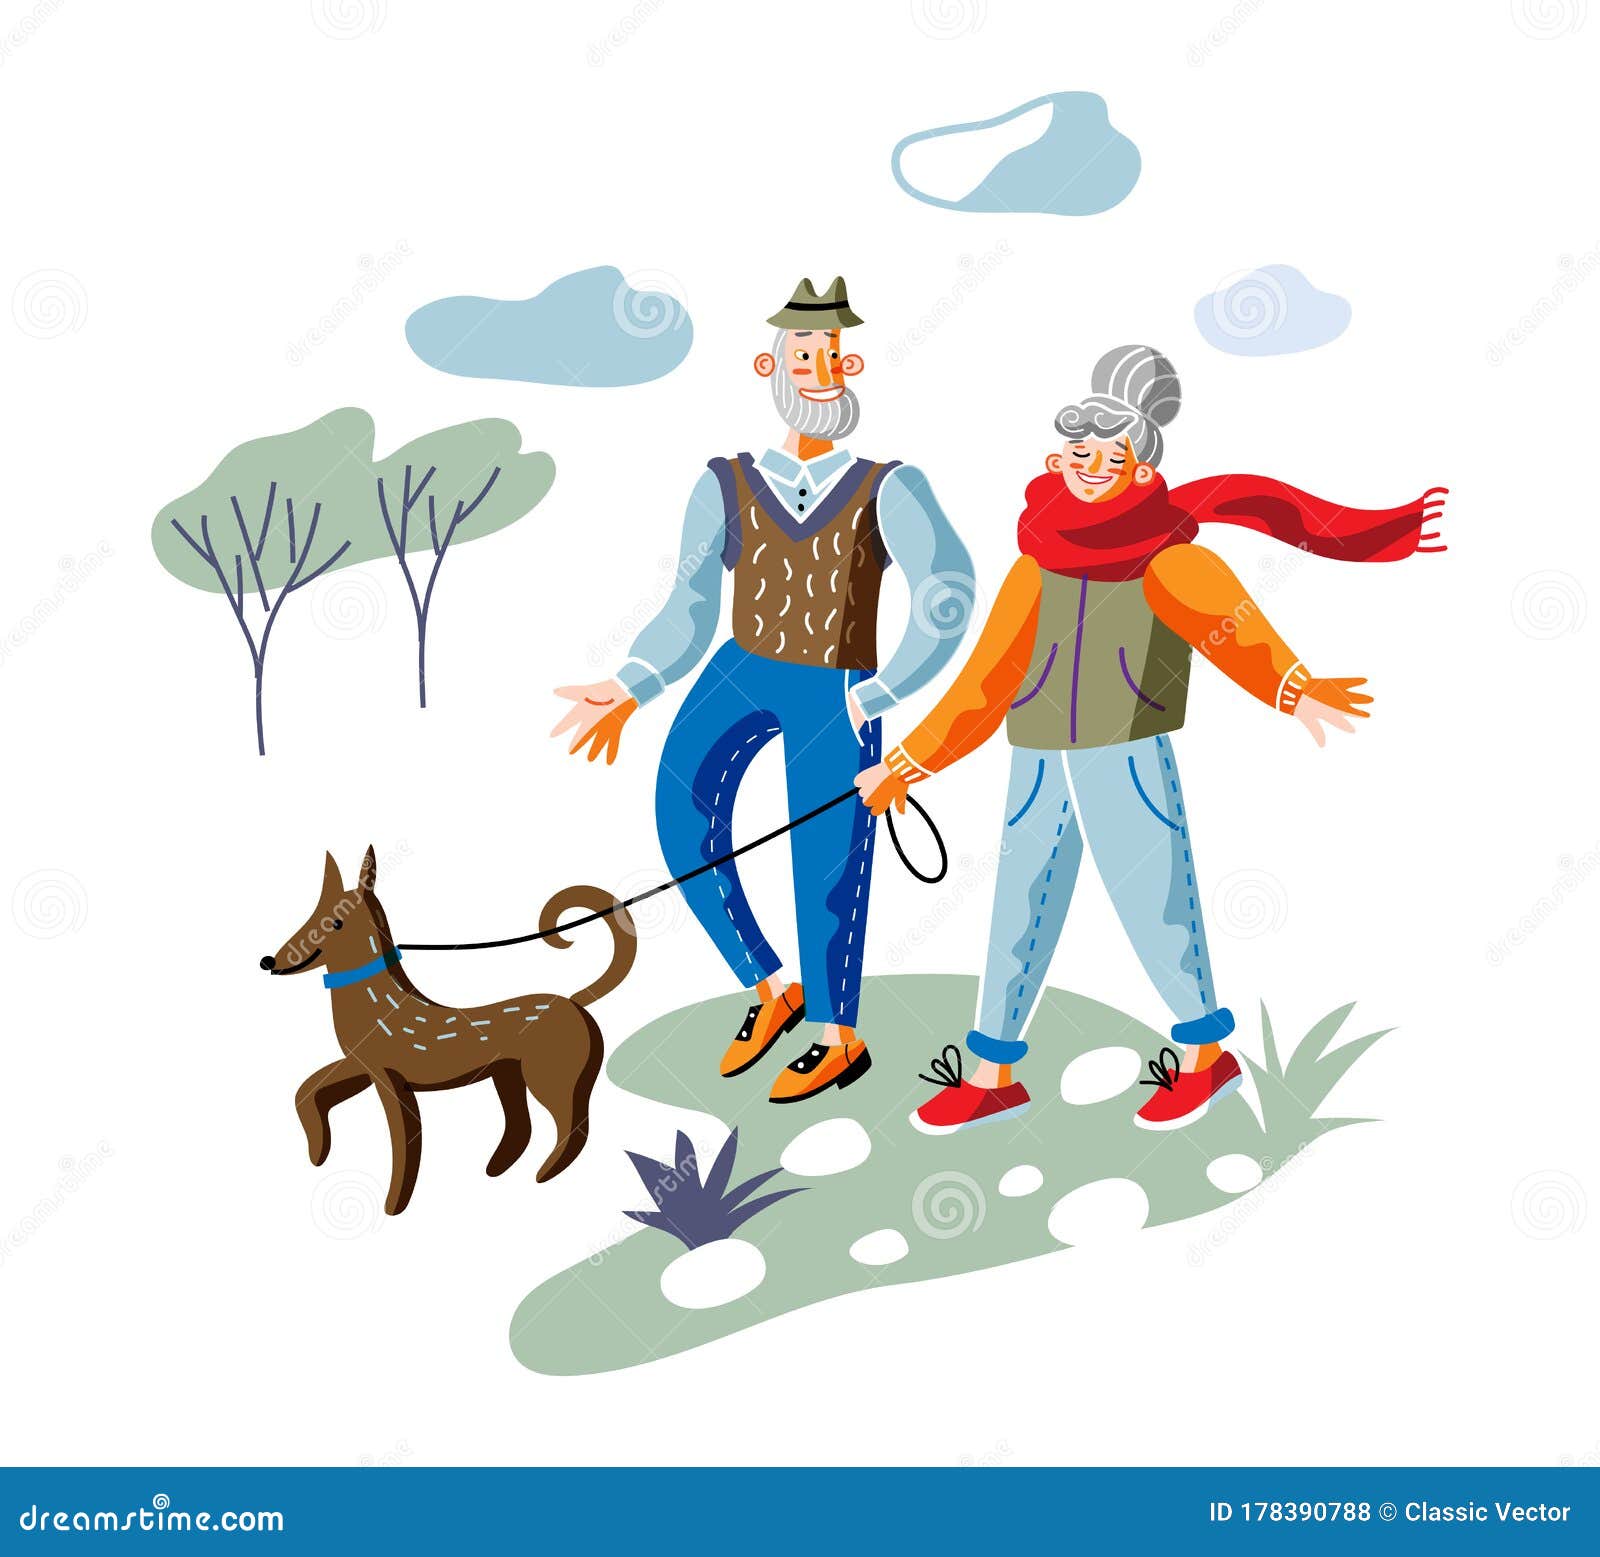 Elderly Couple on Stroll Flat Vector Illustration. Old Man and Woman,  Husband and Wife Cartoon Character Stock Vector - Illustration of couple,  outside: 178390788